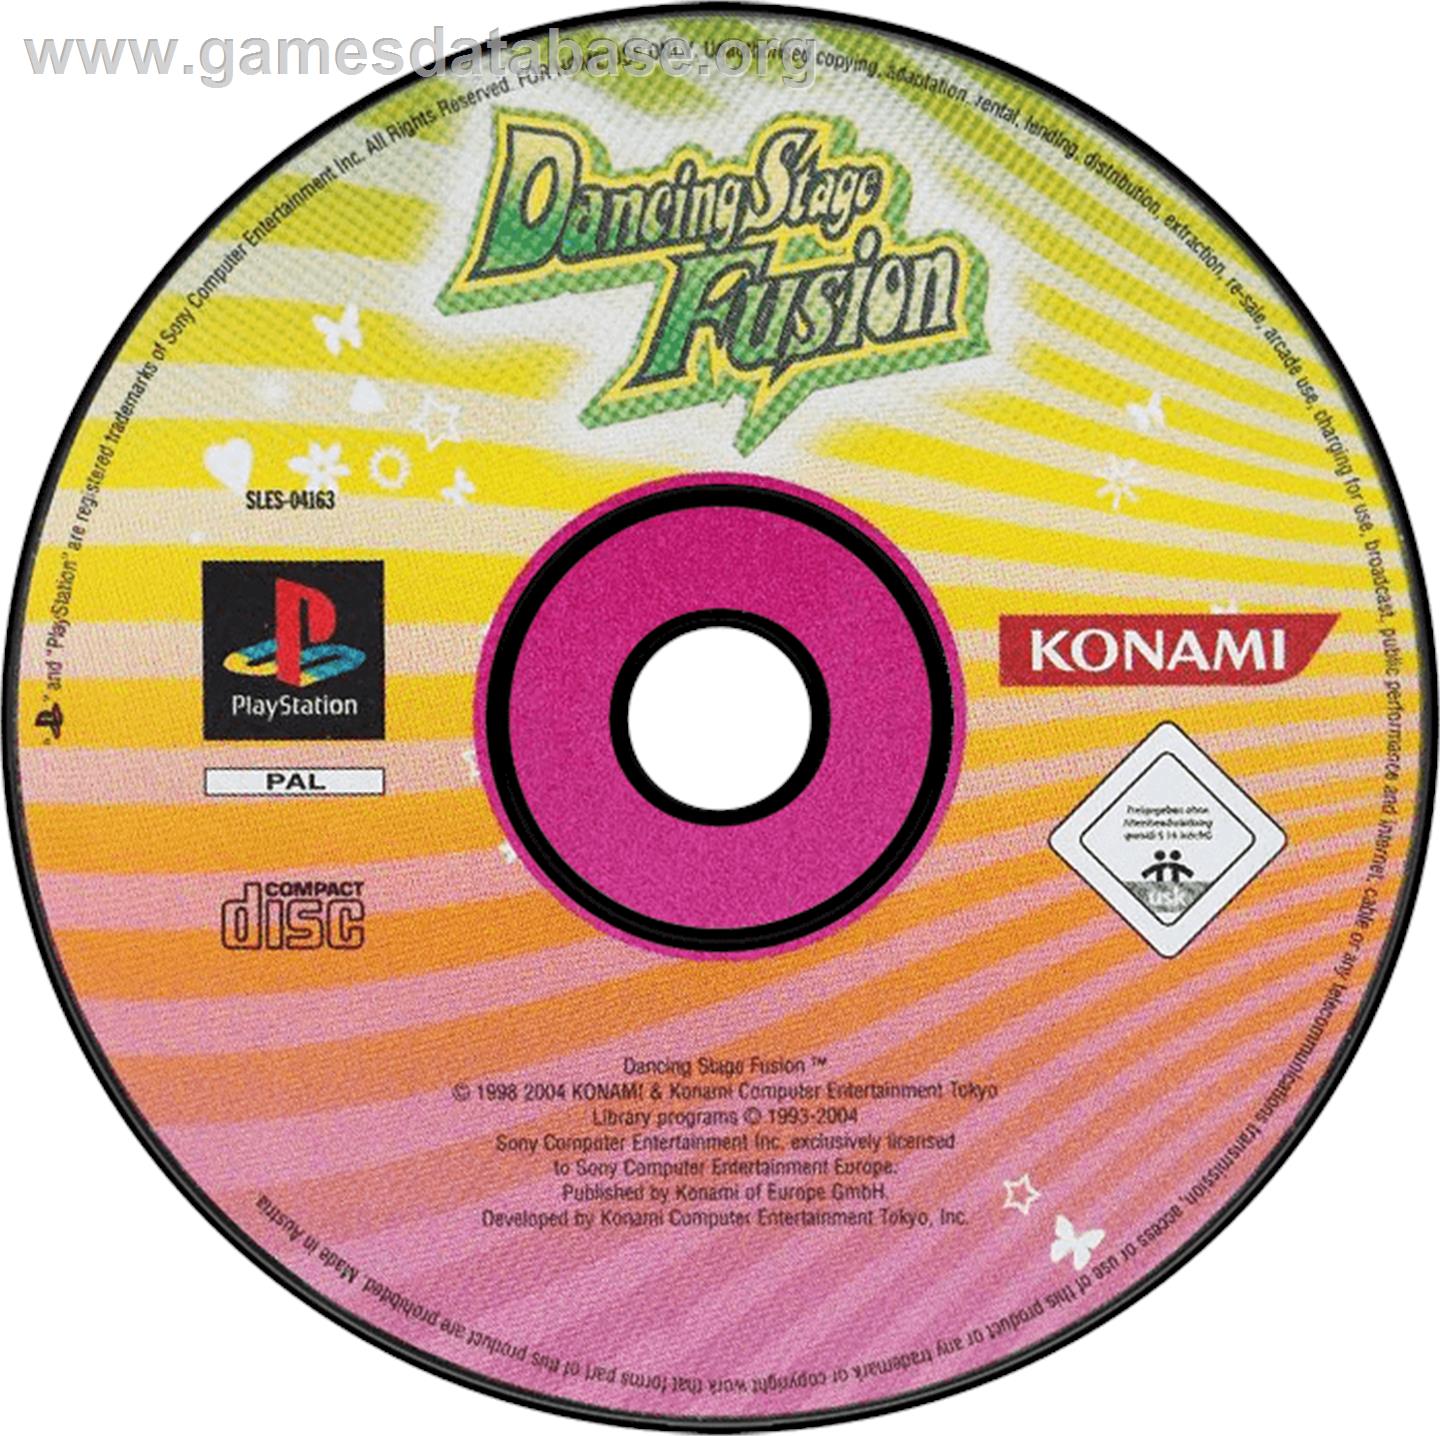 Dancing Stage Fusion - Sony Playstation - Artwork - Disc